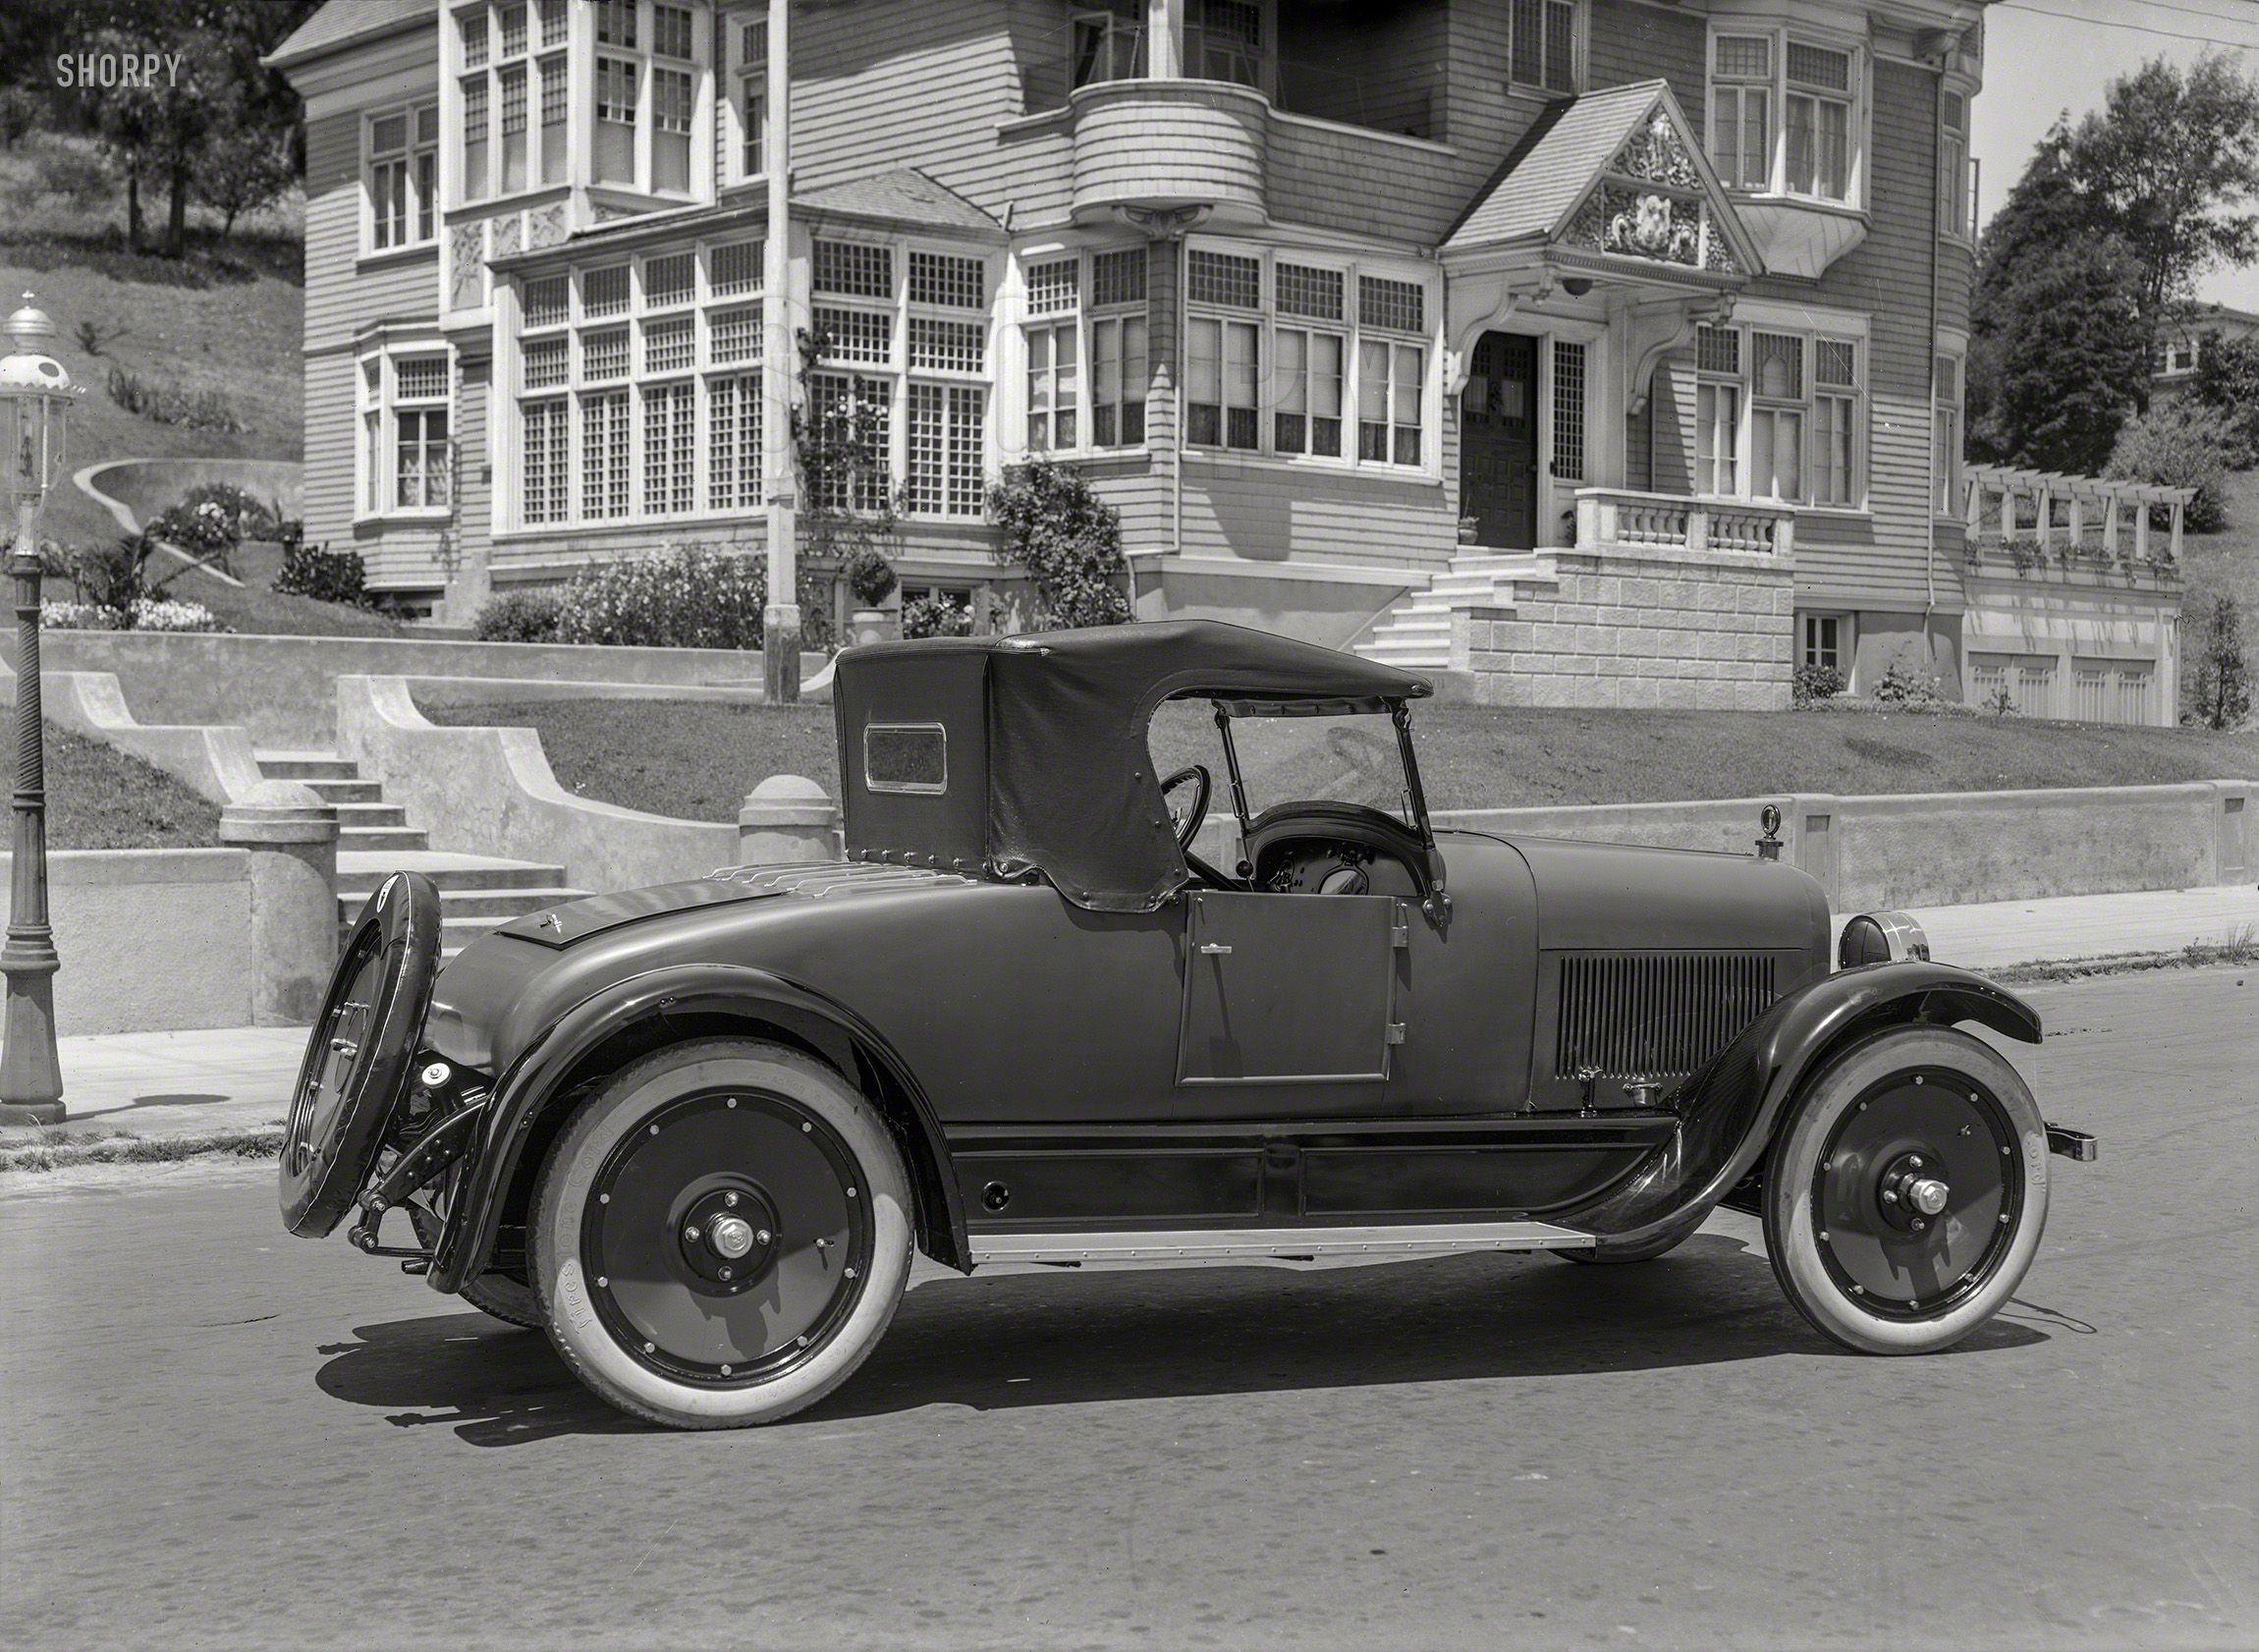 San Francisco circa 1923. "Jordan Playboy roadster." A car famous for the ad copy that sold it. 5x7 glass negative by Christopher Helin. View full size.
&nbsp; &nbsp; &nbsp; &nbsp; Somewhere west of Laramie there's a broncho-busting, steer-roping girl who knows what I'm talking about. She can tell what a sassy pony, that's a cross between greased lightning and the place where it hits, can do with eleven hundred pounds of steel and action when he's going high, wide and handsome.  The truth is -- the Playboy was built for her. Built for the lass whose face is brown with the sun when the day is done of revel and romp and race. She loves the cross of the wild and the tame.

&nbsp; &nbsp; &nbsp; &nbsp; There’s a savor of links about that car -- of laughter and lilt and light -- a hint of old loves -- and saddle and quirt. It’s a brawny thing -- yet a graceful thing for the sweep o' of the Avenue. Step into the Playboy when the hour grows dull with things dead and stale. Then start for the land of real living with the spirit of the lass who rides, lean and rangy, into the red horizon of a Wyoming twilight.